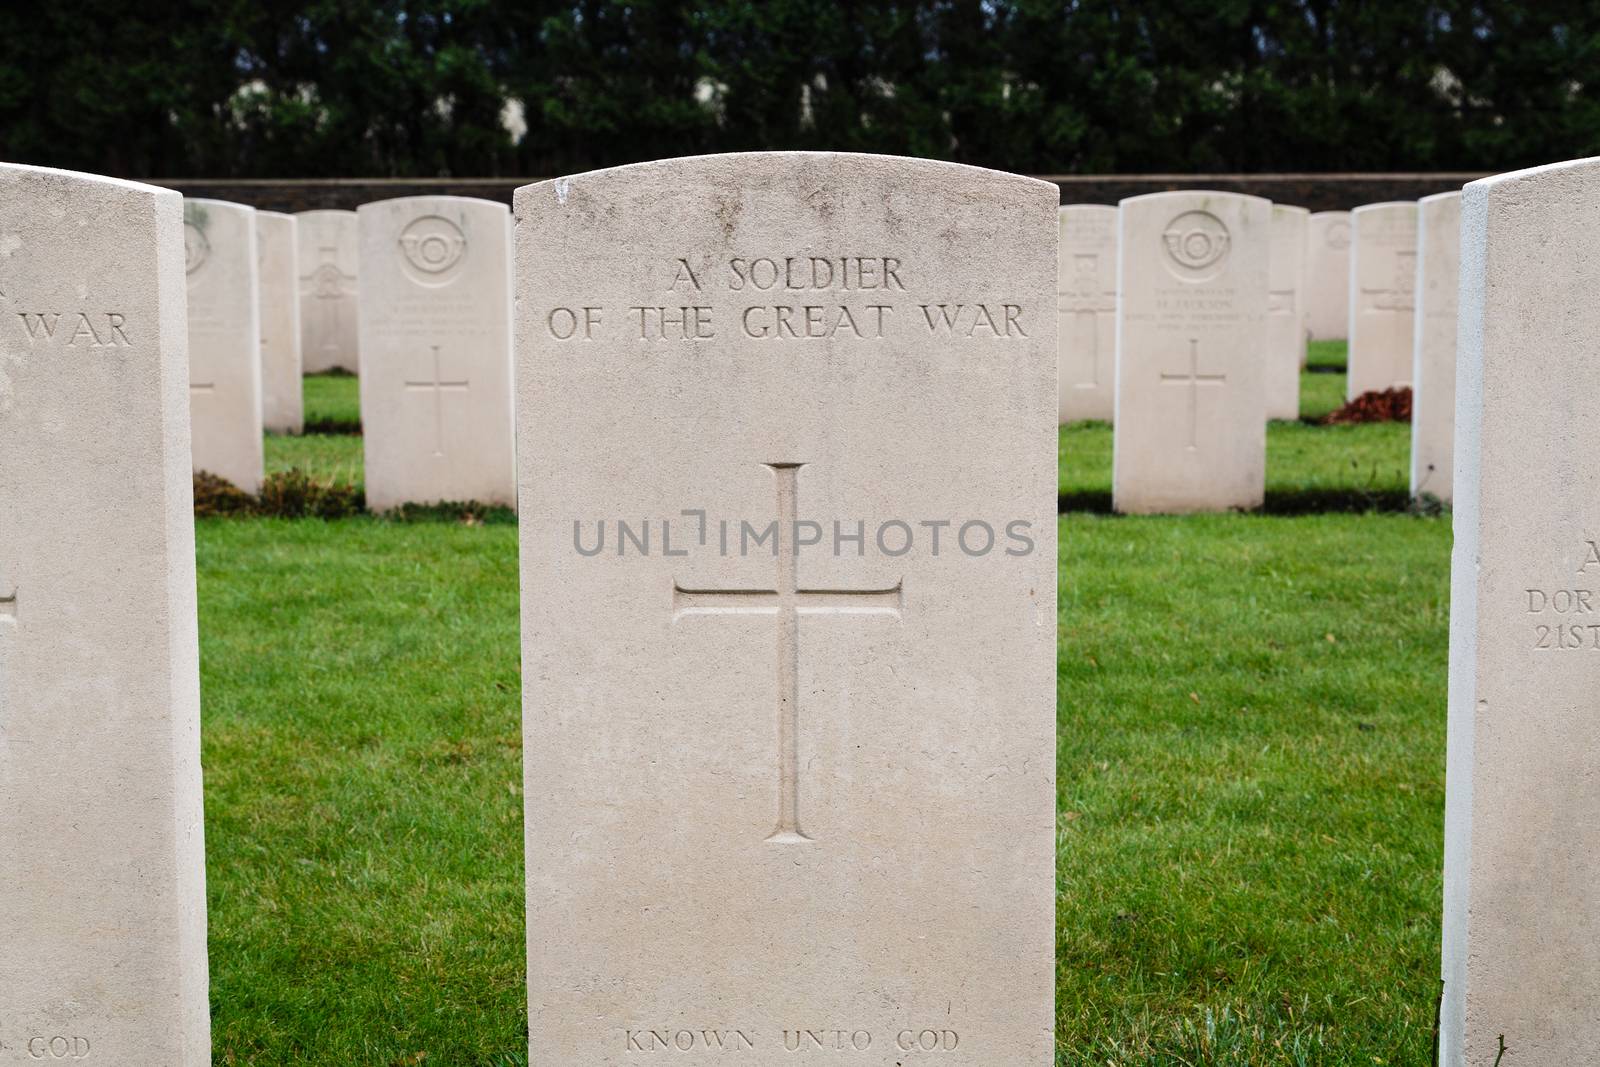 Ramscappelle Road Military Cemetery is a British military cemetery from the First World War, Sint-Joris, Belgium